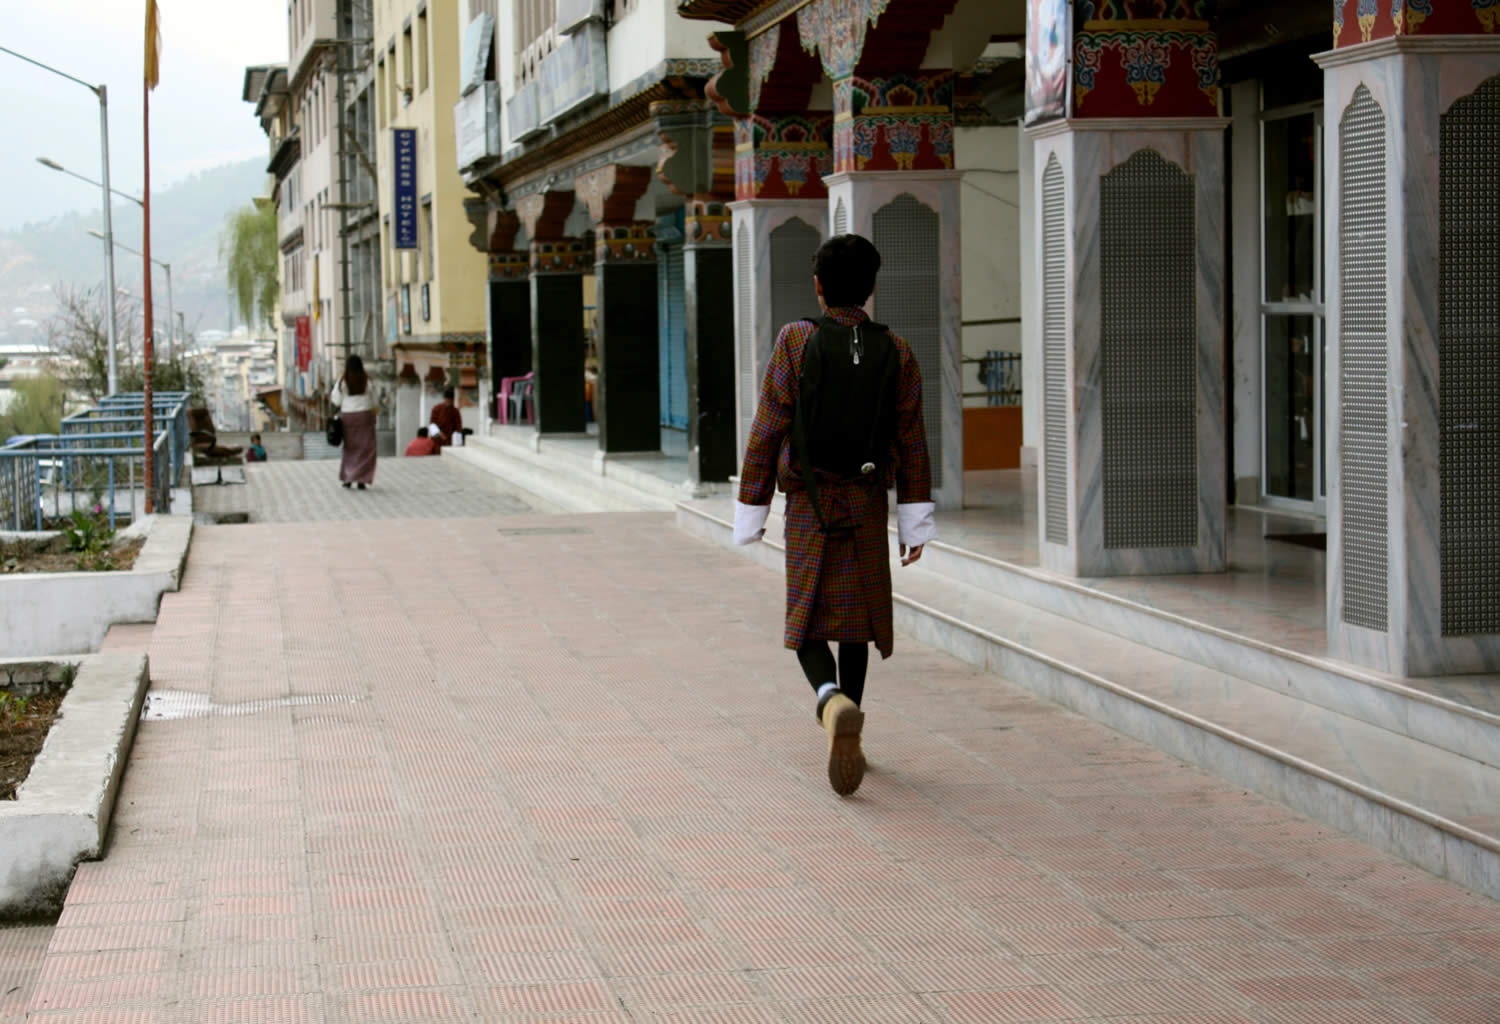 On Thimphu street, a man wearing the traditional 'goh' for men.